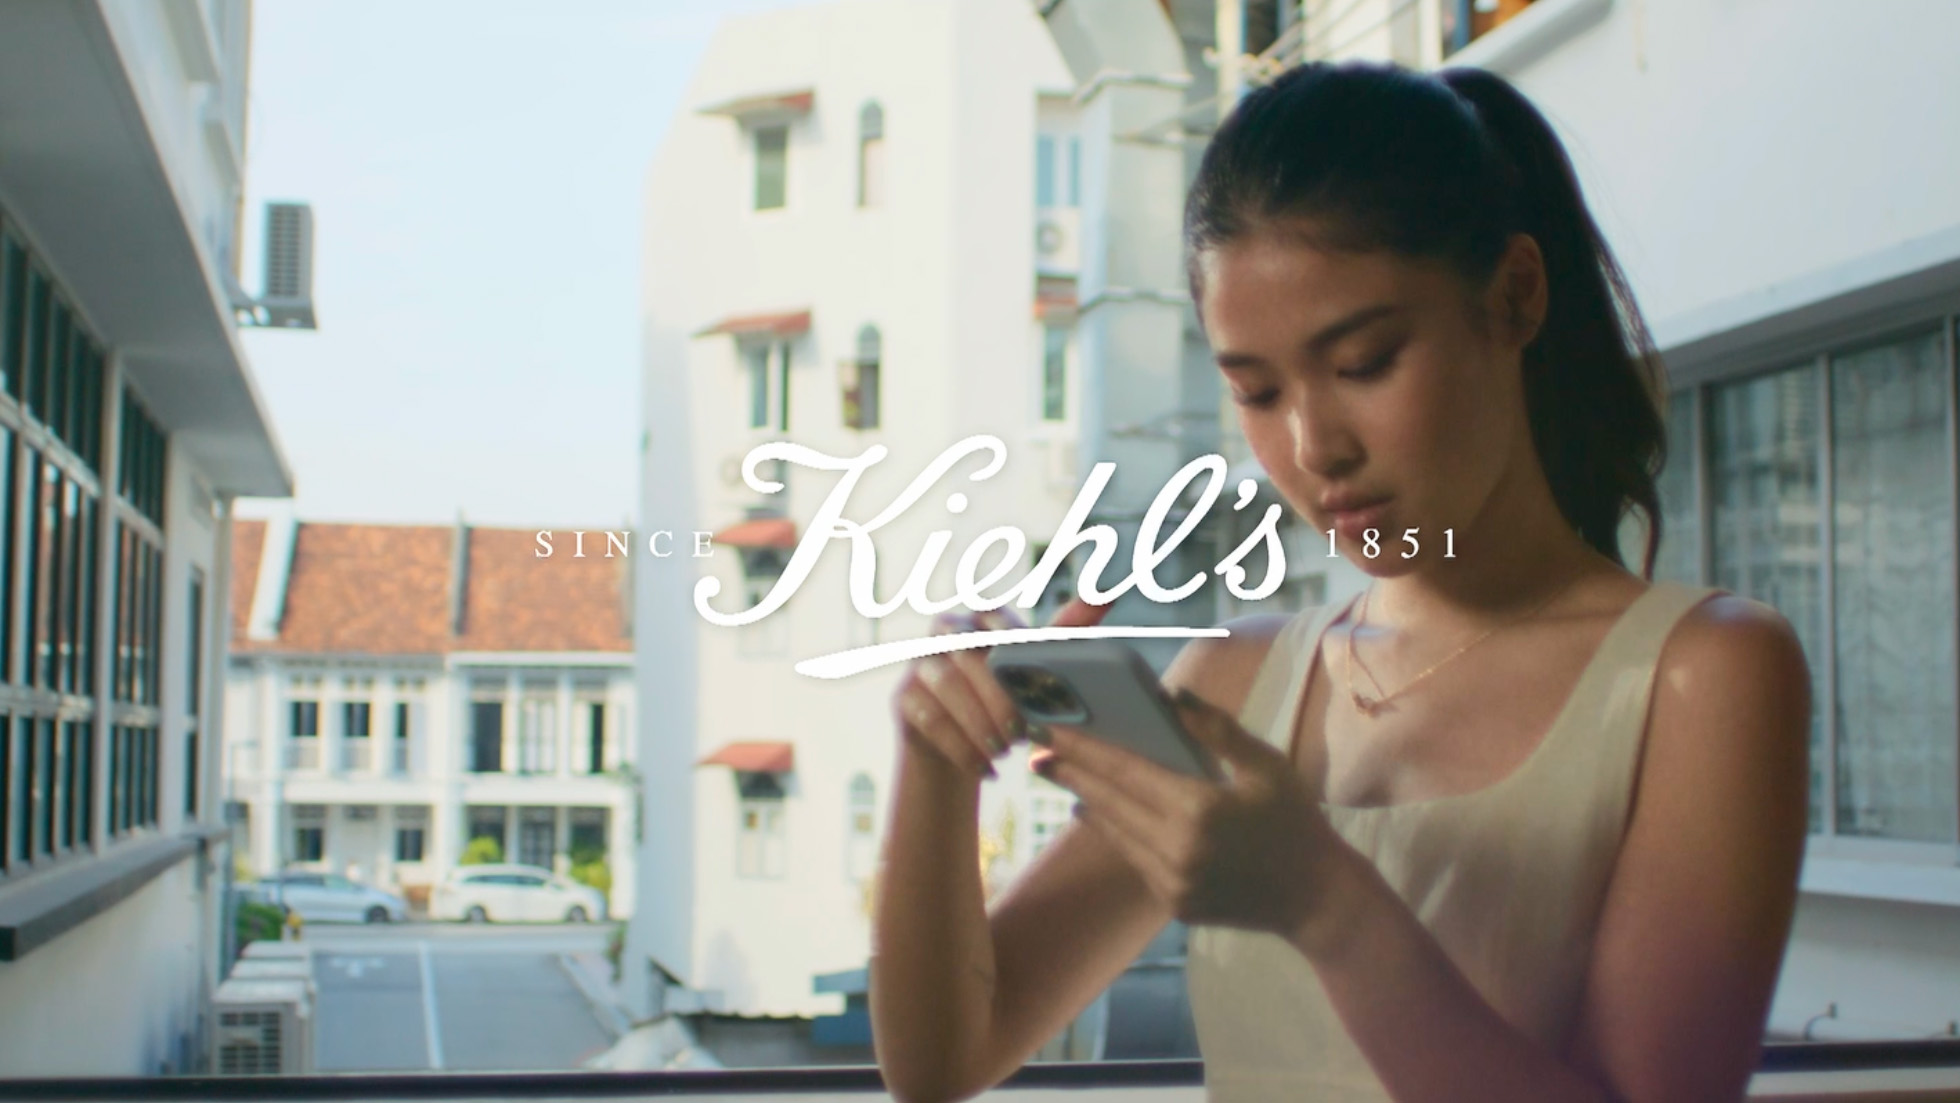 Kiehl's Renewal - with Yixin Chen